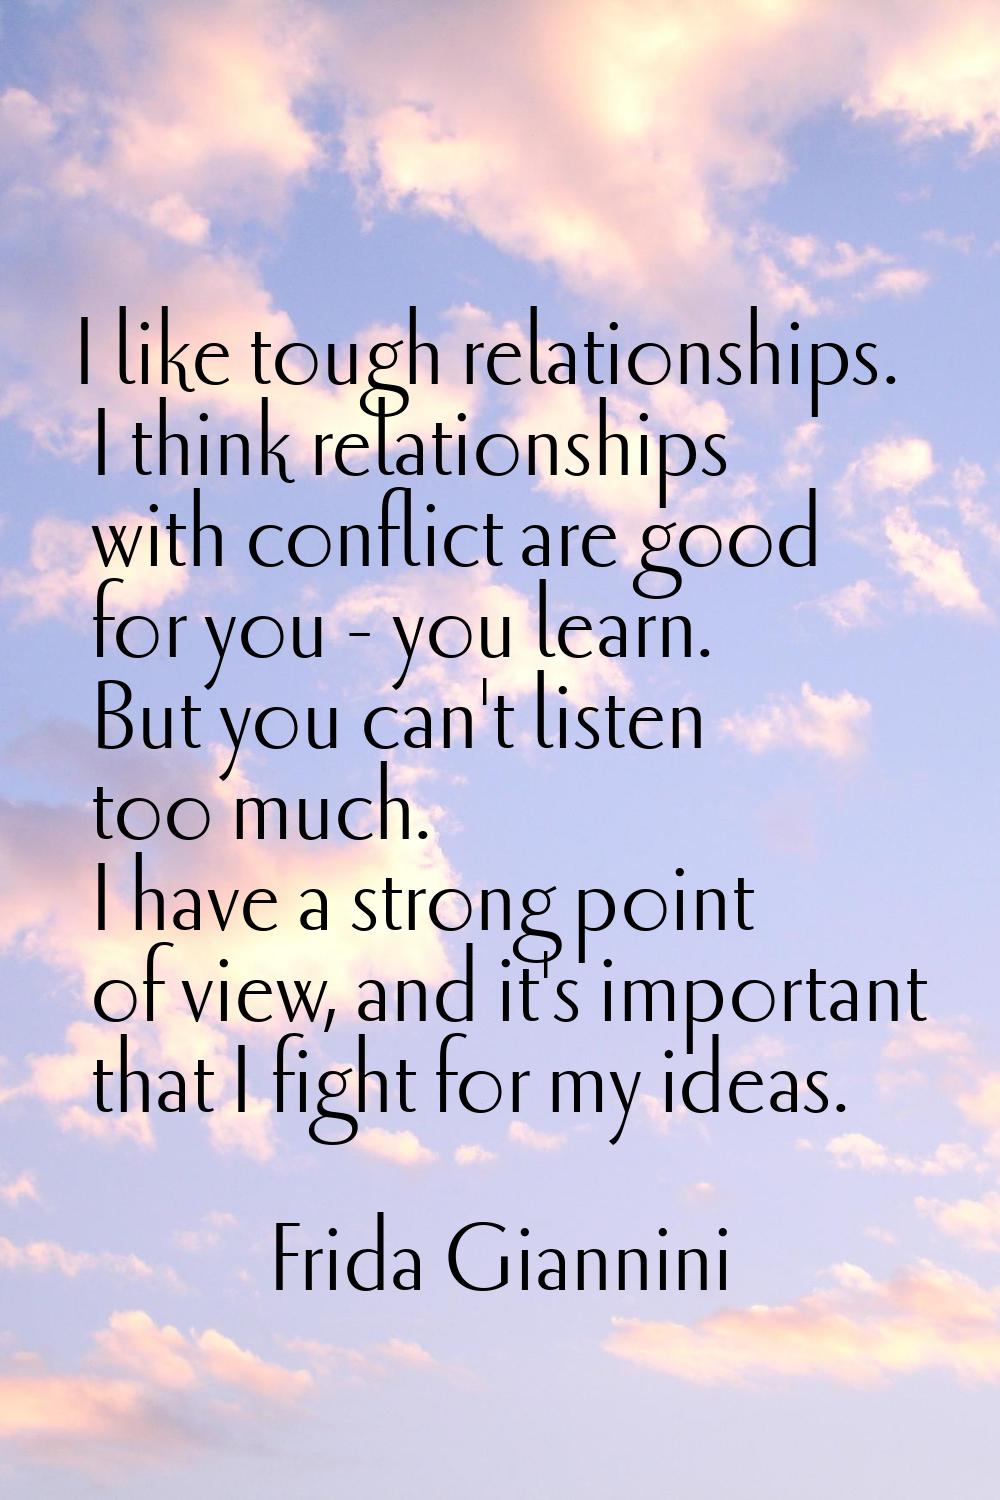 I like tough relationships. I think relationships with conflict are good for you - you learn. But y